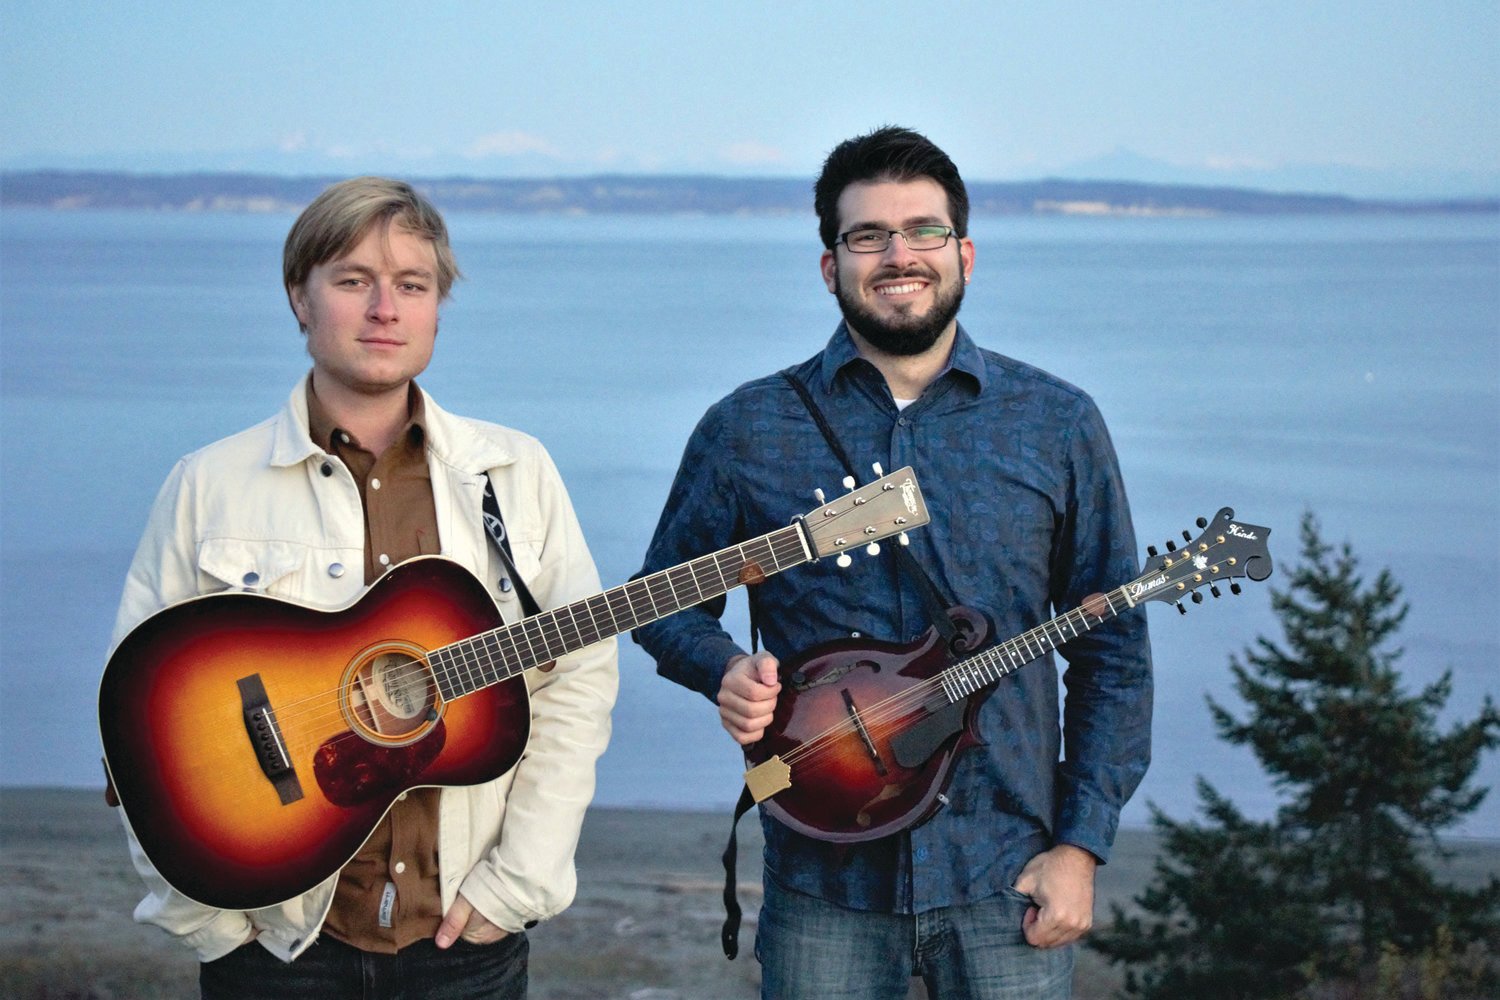 Chris Luquette and Nick Dumas, above, will be joined by Andrew Knapp for a concert in Port Townsend.